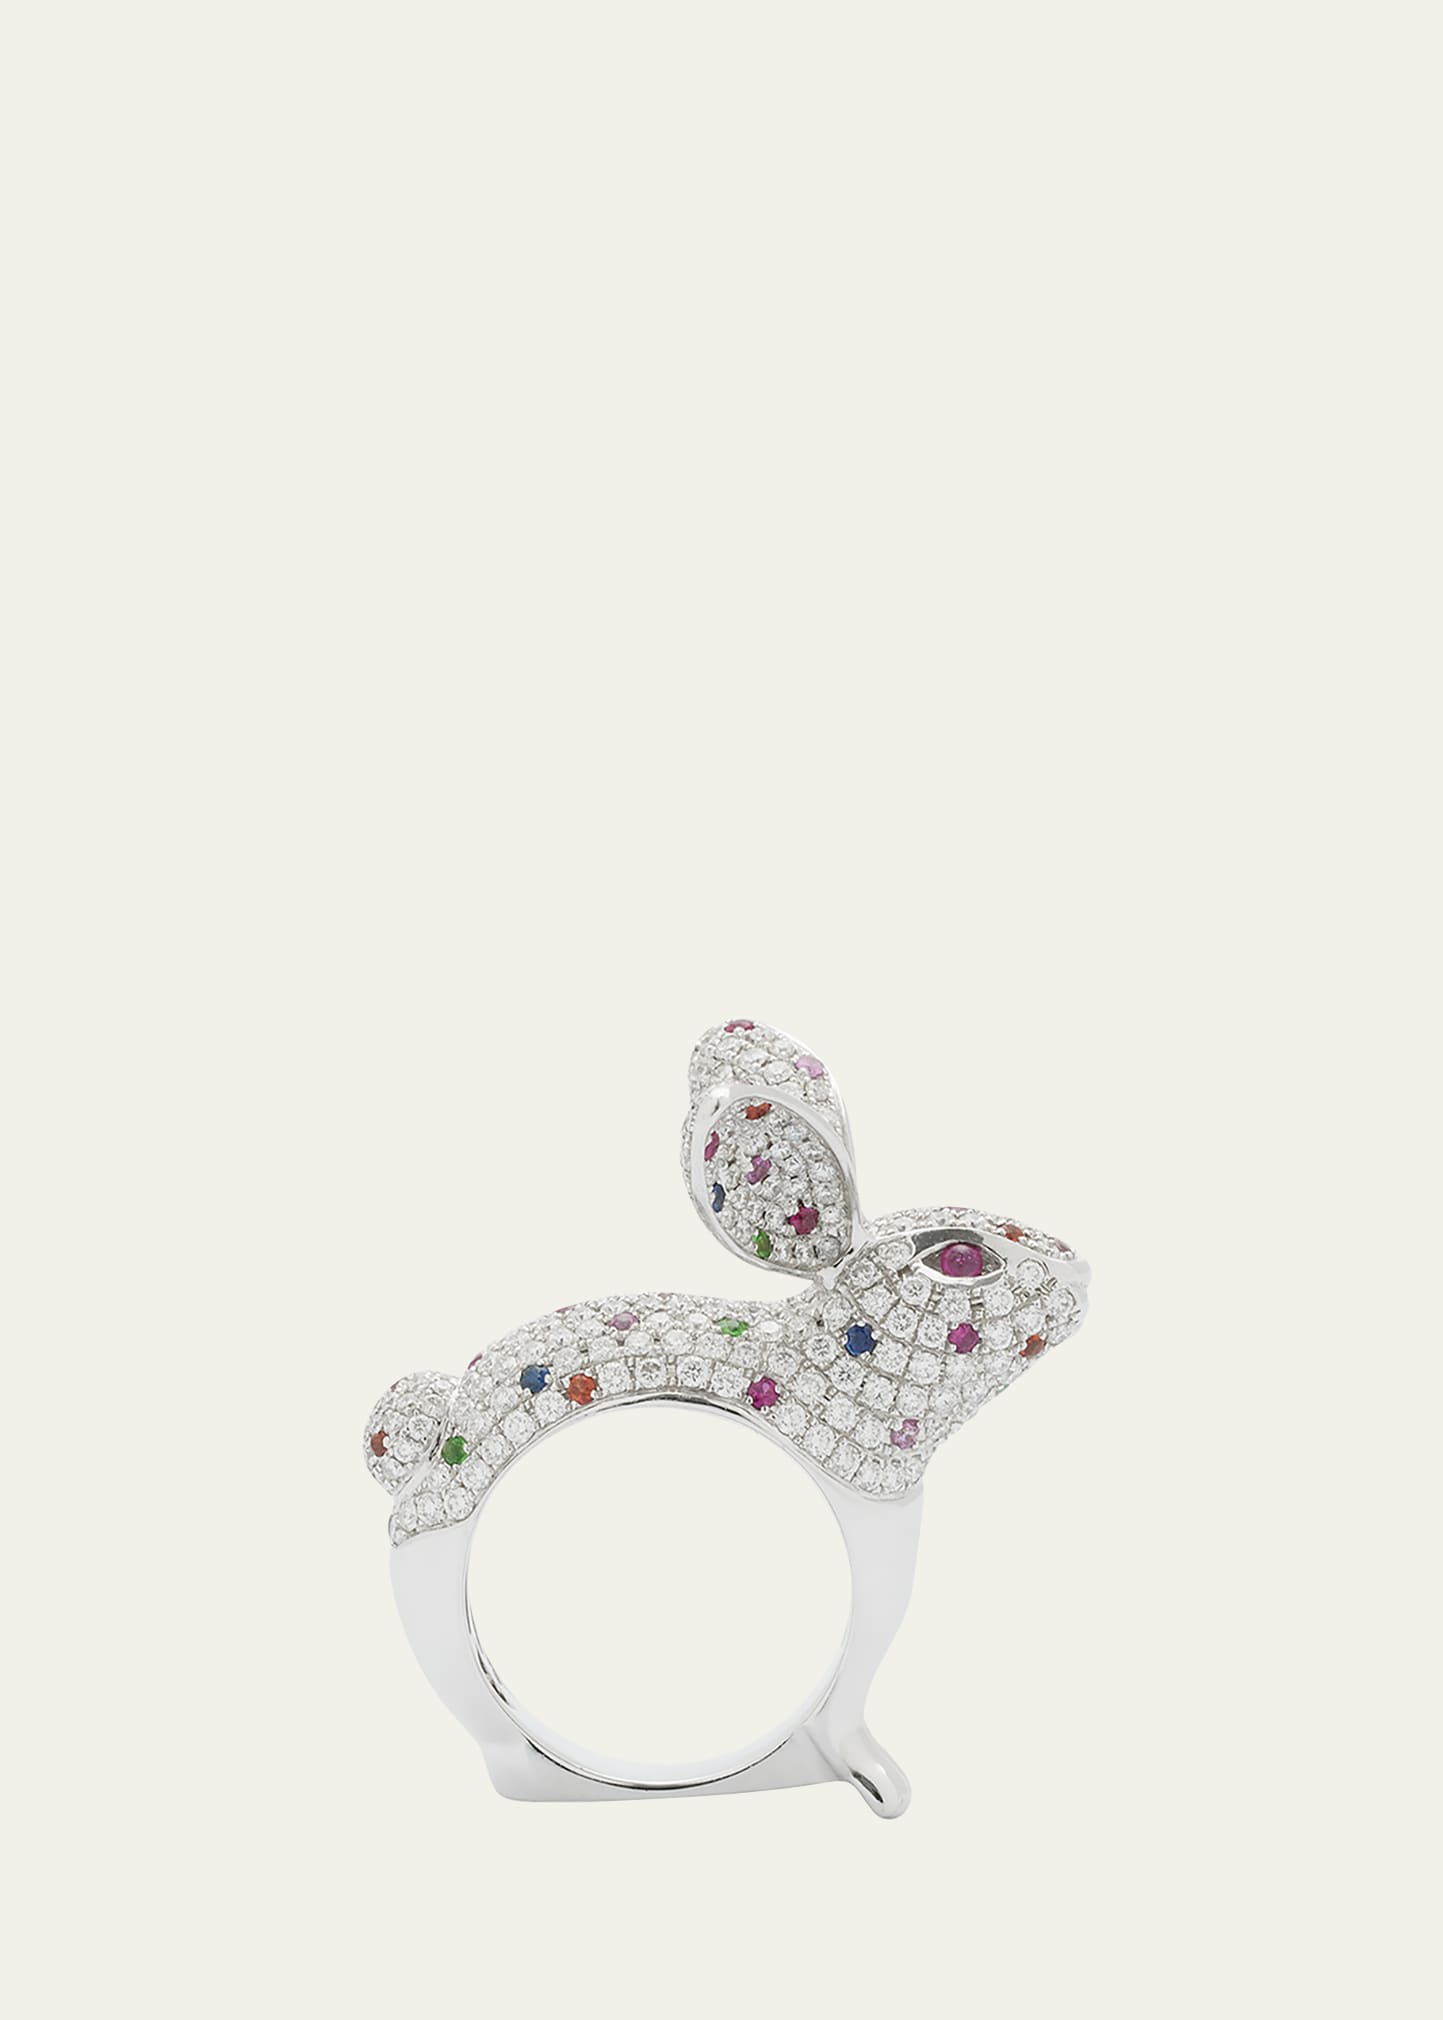 18K White Gold Bunny Ring with Diamonds, Sapphires, Garnets, and Rubies